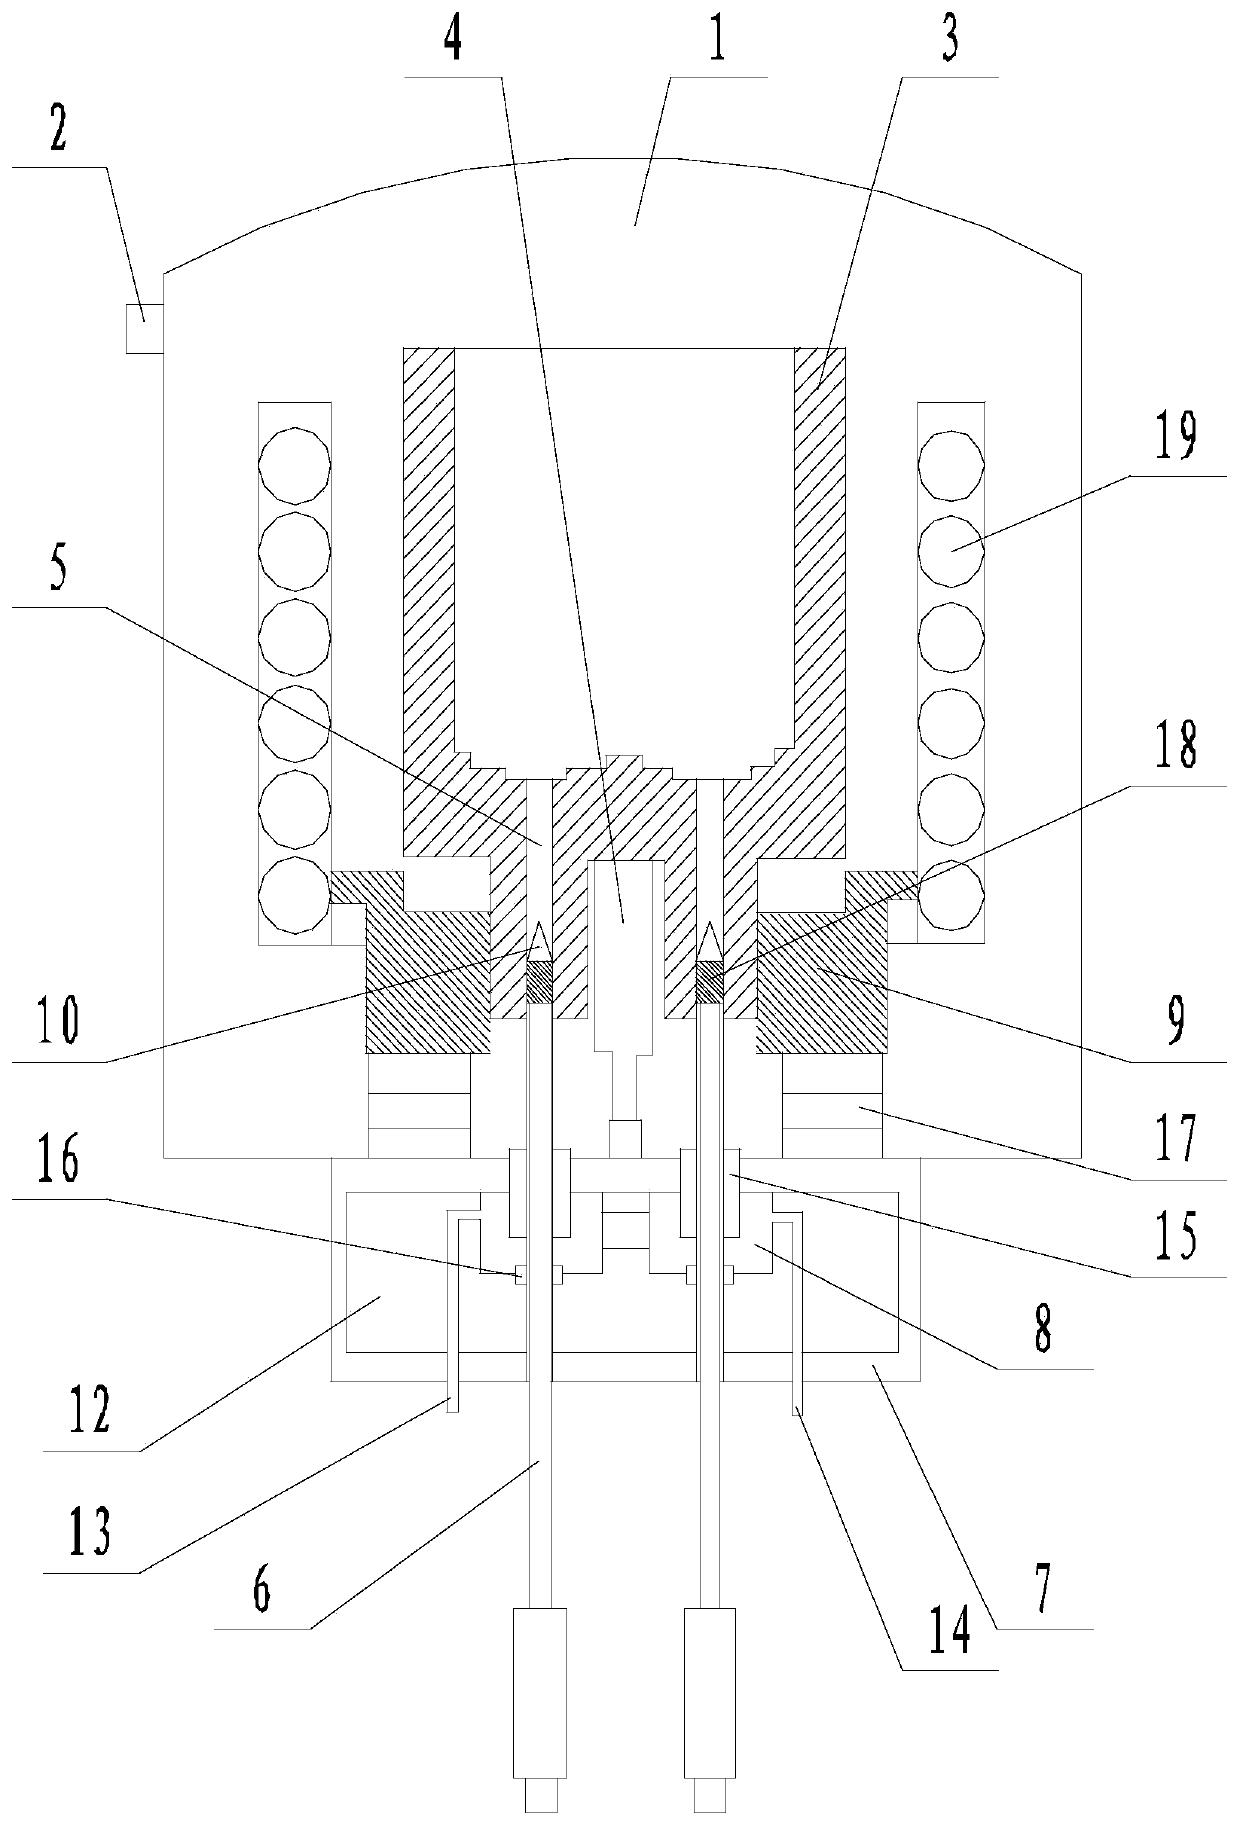 A directional drawing and discharging vacuum melting furnace